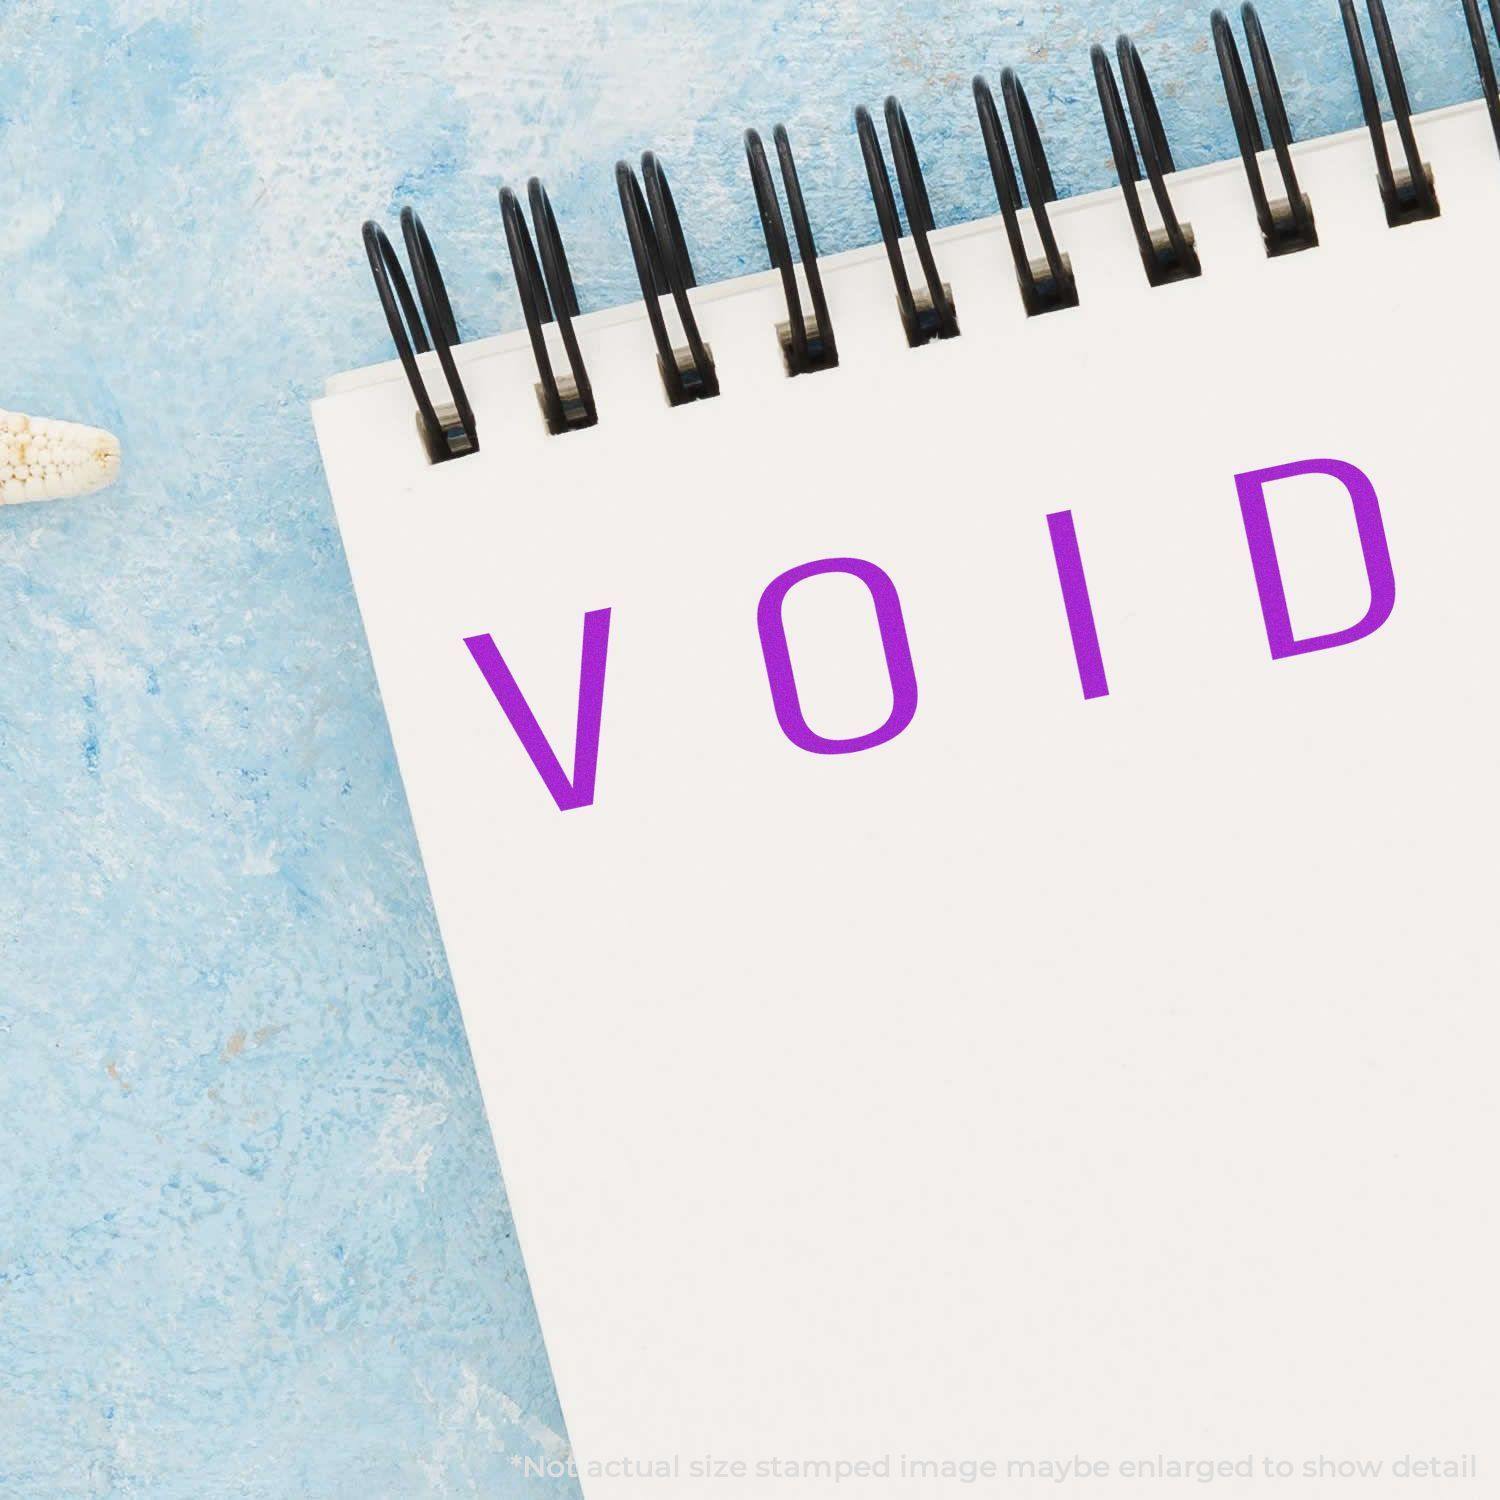 A stock office rubber stamp with a stamped image showing how the text "VOID" in a narrow font is displayed after stamping.